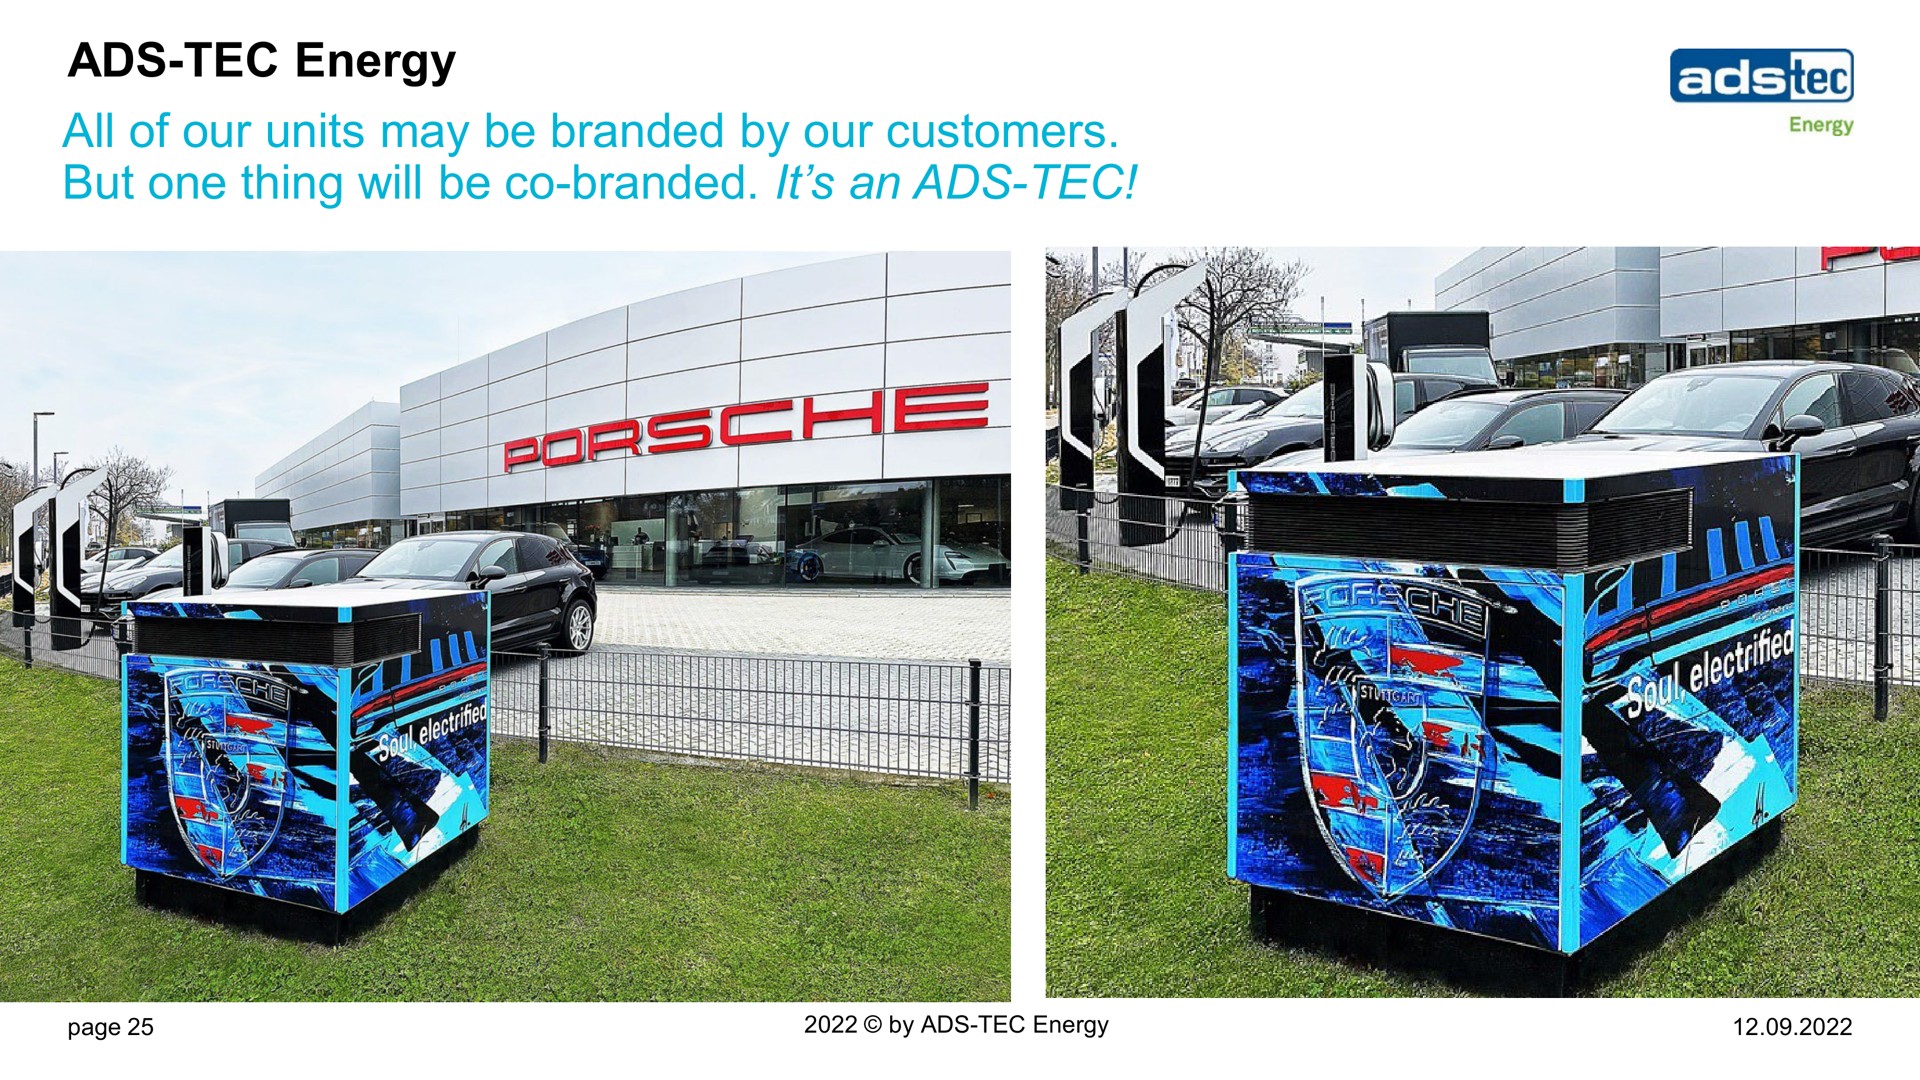 ads tec energy all of our units may be branded by our customers but one thing will be branded it an ads tec | ads-tec Energy